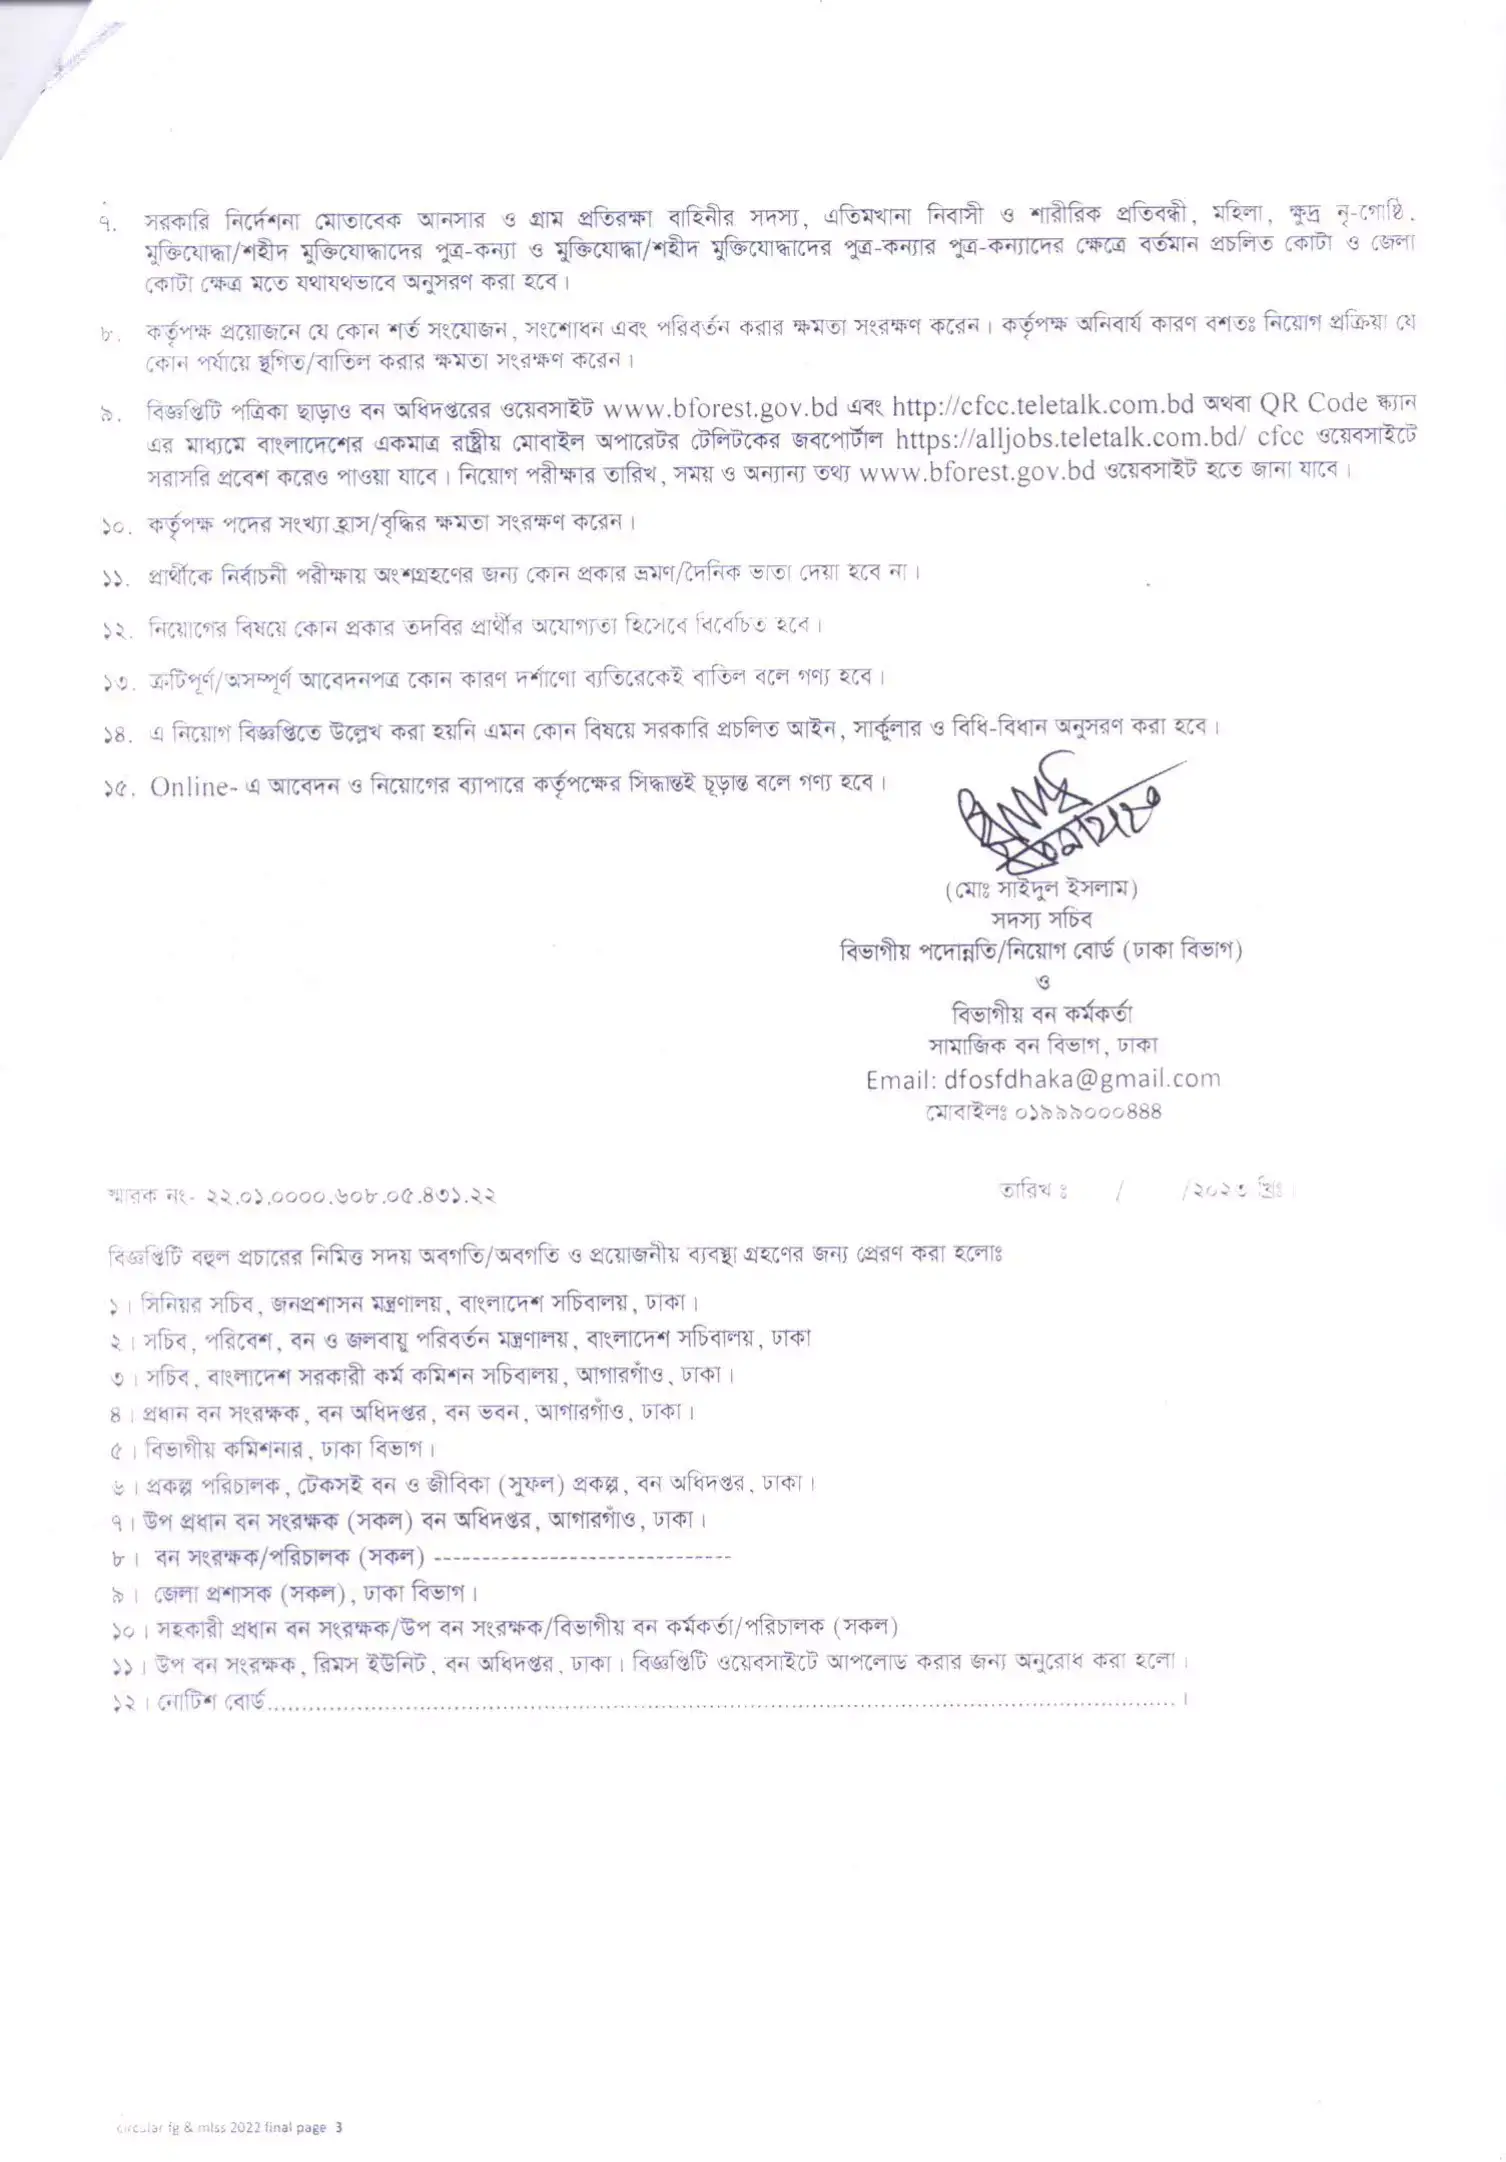 Third page of Bangladesh Forest Department recruitment circular published on 09 February 2023